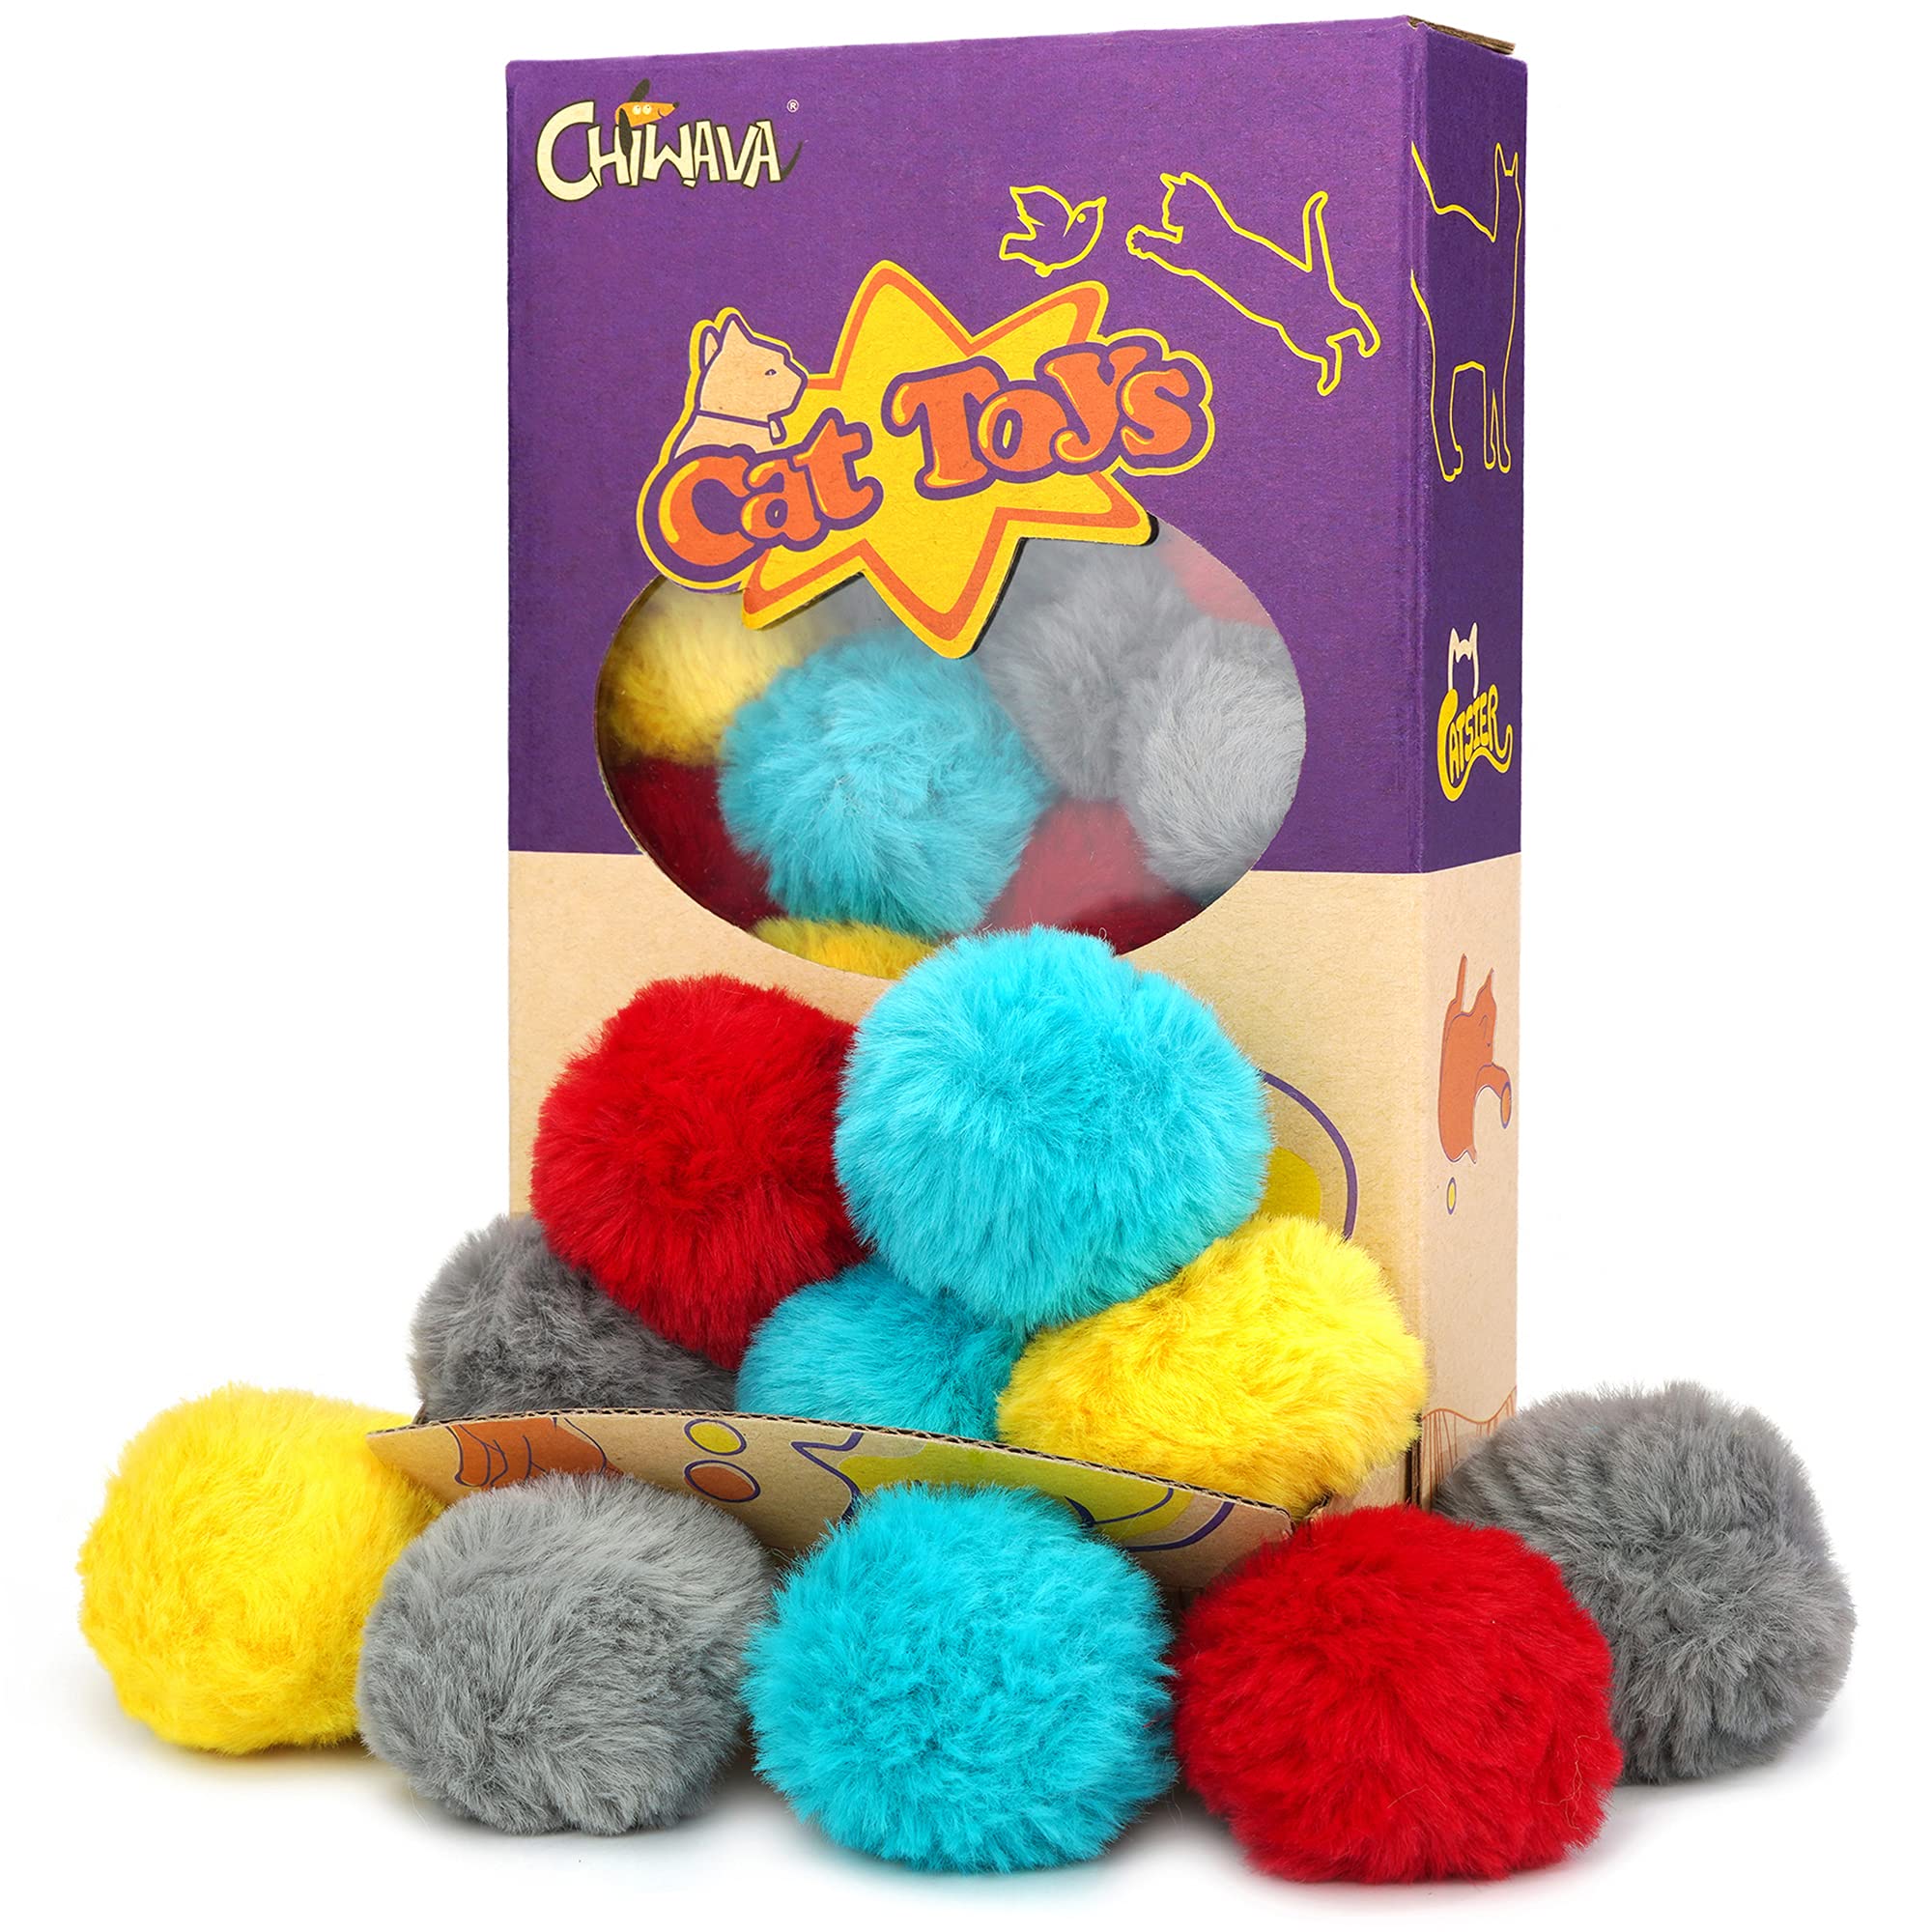 Colorful Pom Poms Balls Toy With Bell For Indoor Cats, Lightweight